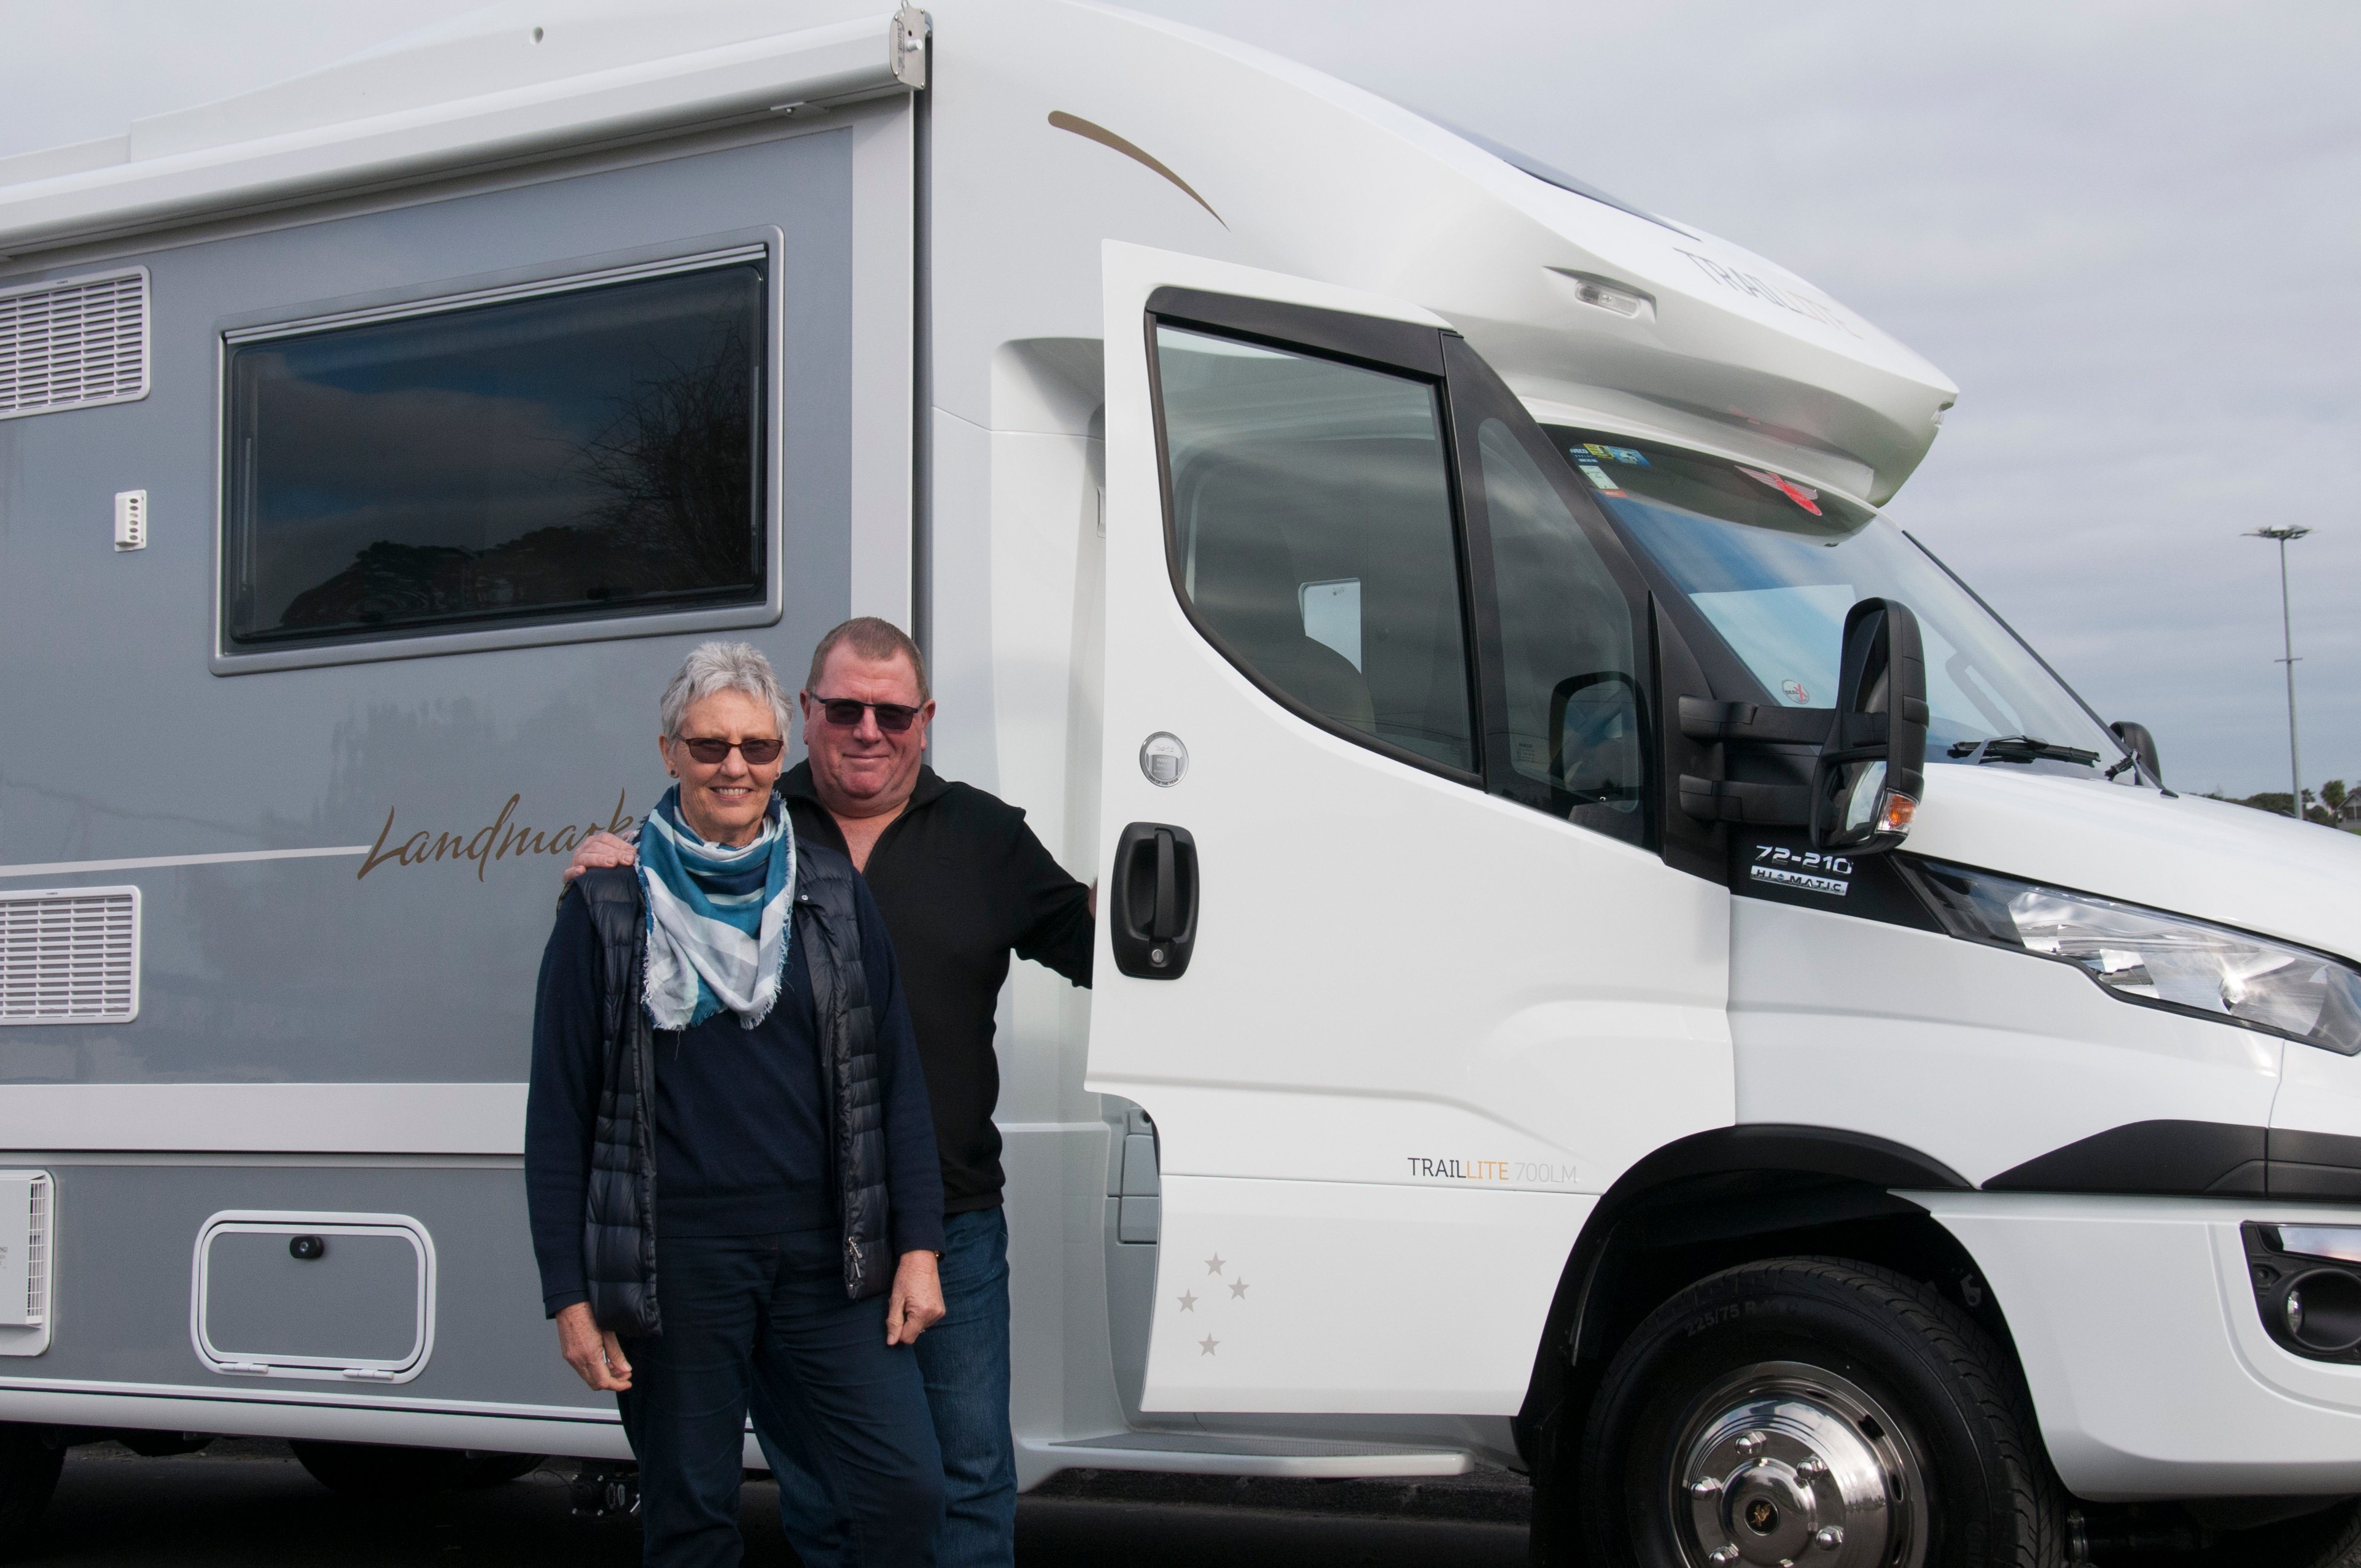 Beth and Peter are looking forward to exploring New Zealand in their state-of-the-art custom-built, Traillite motorhome 